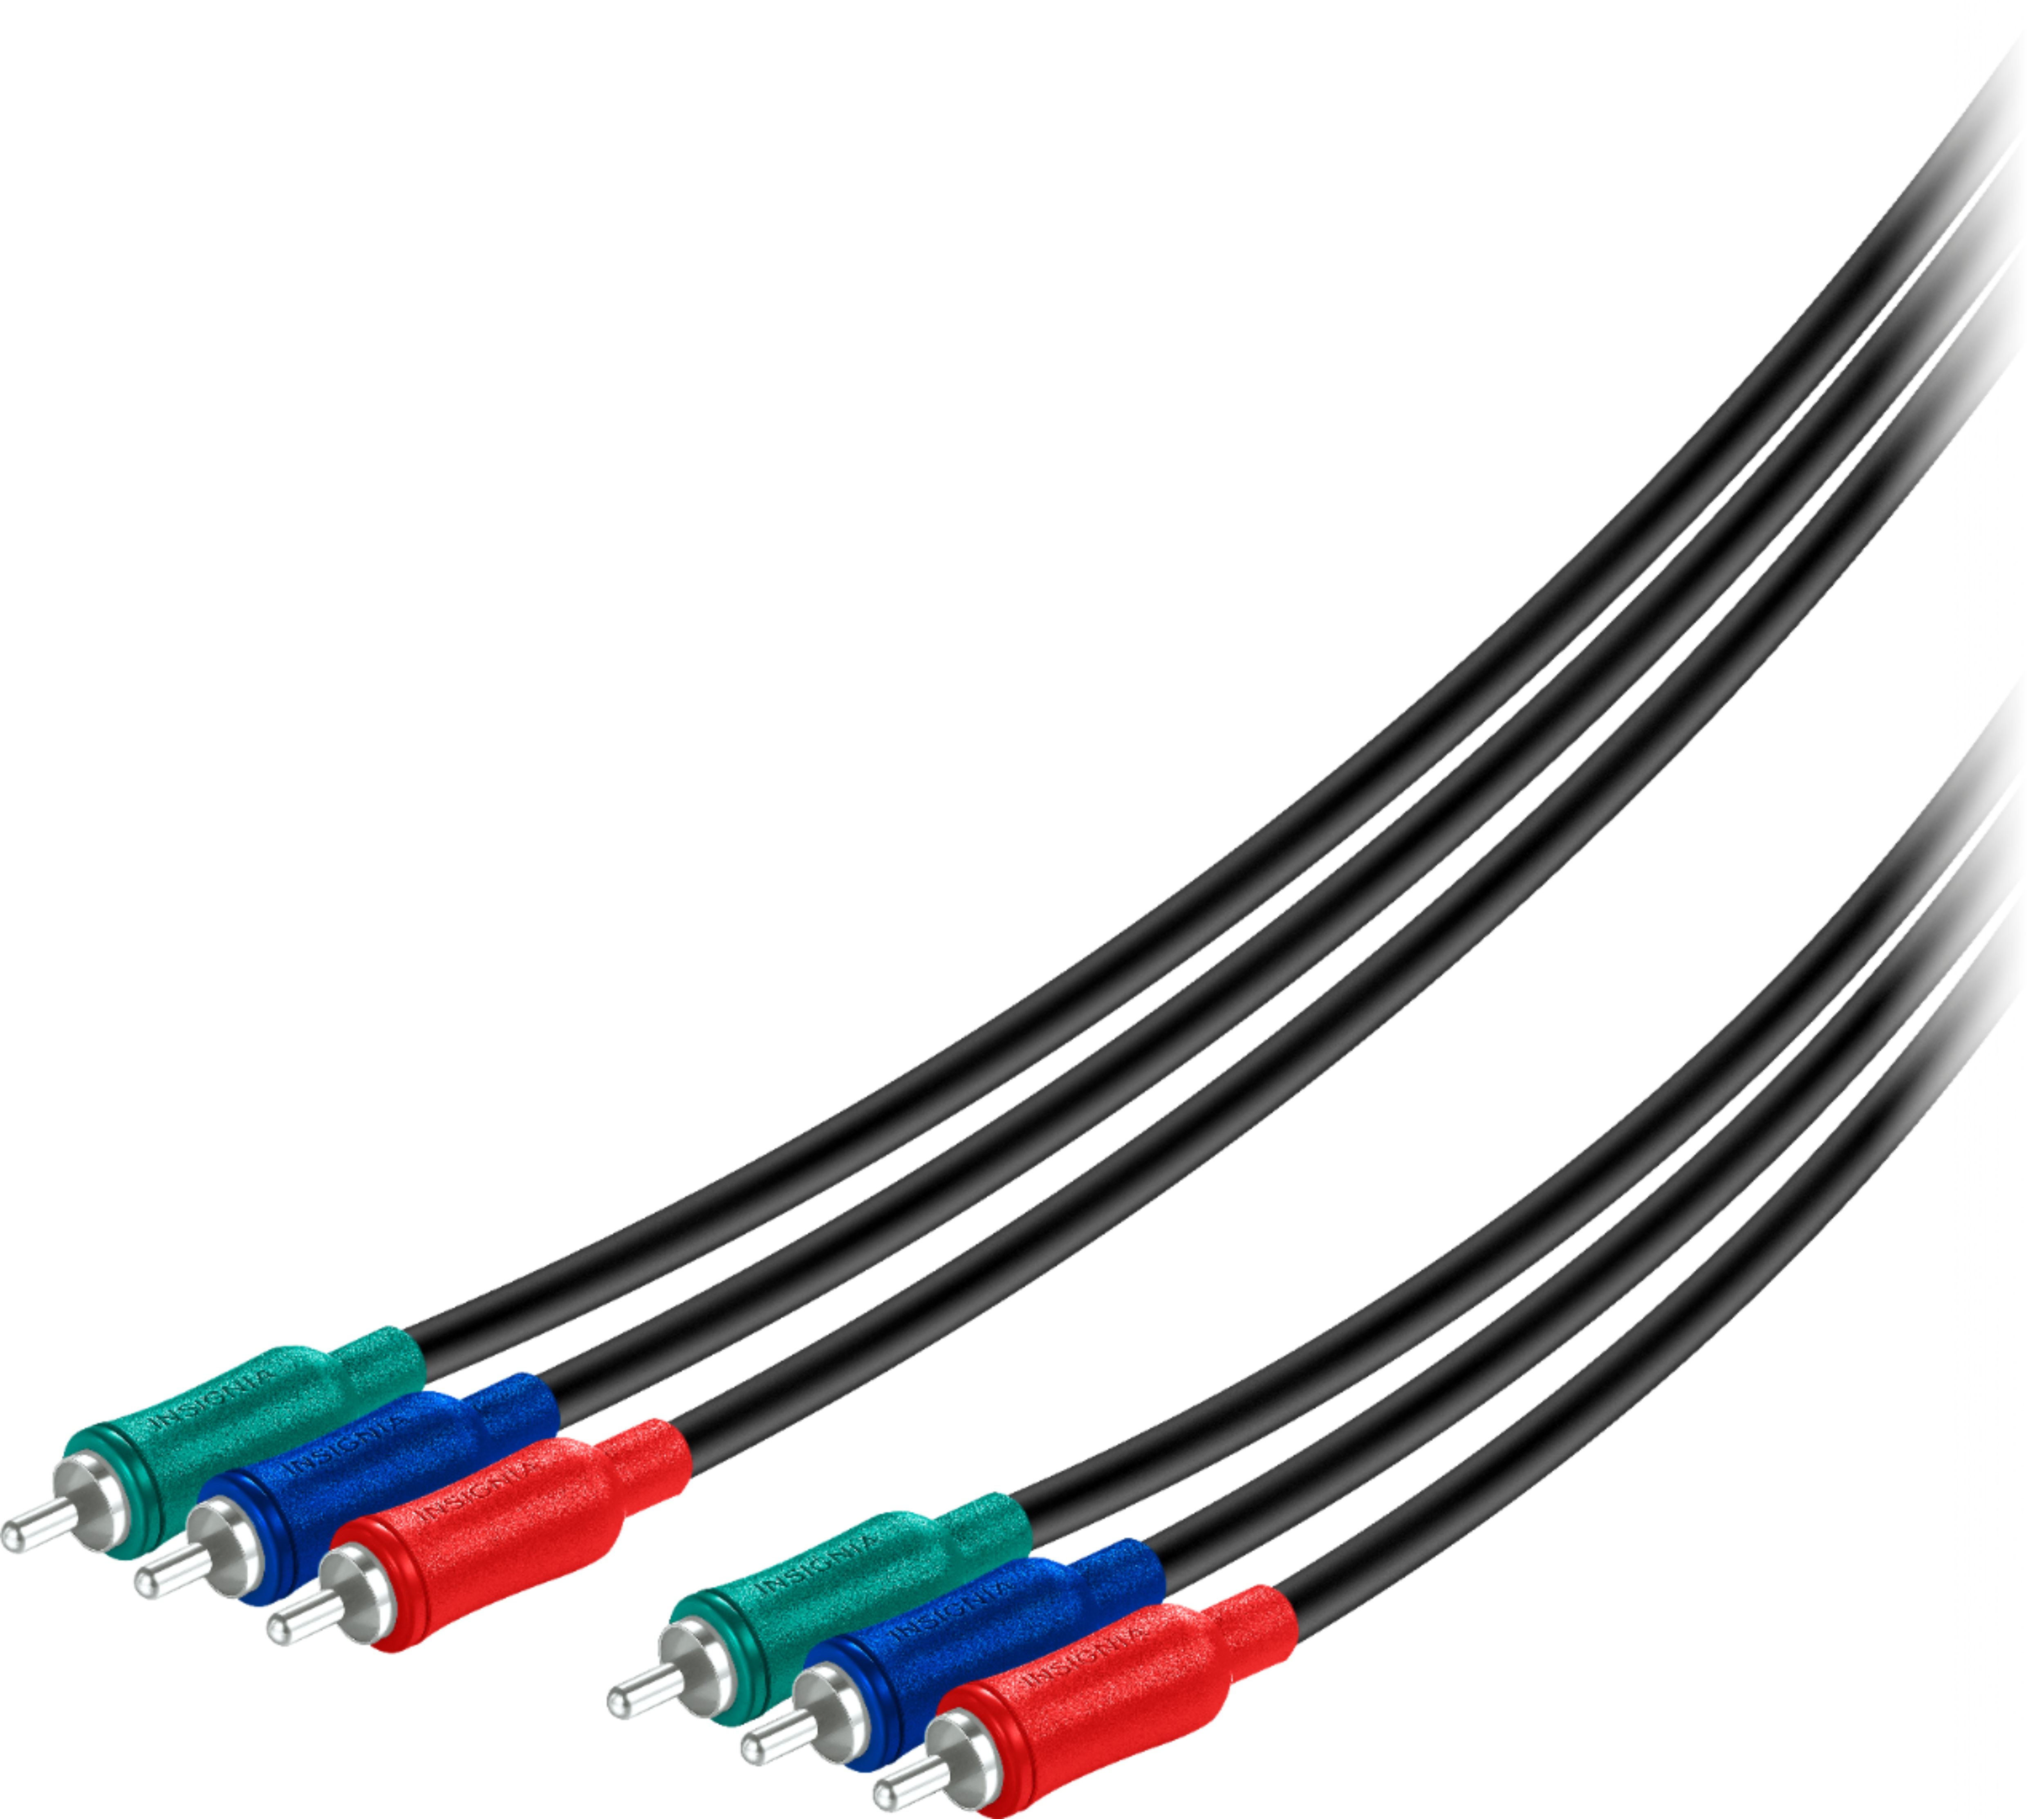 Angle View: AudioQuest - Water 3.3' RCA Interconnect Cable - Black/Blue